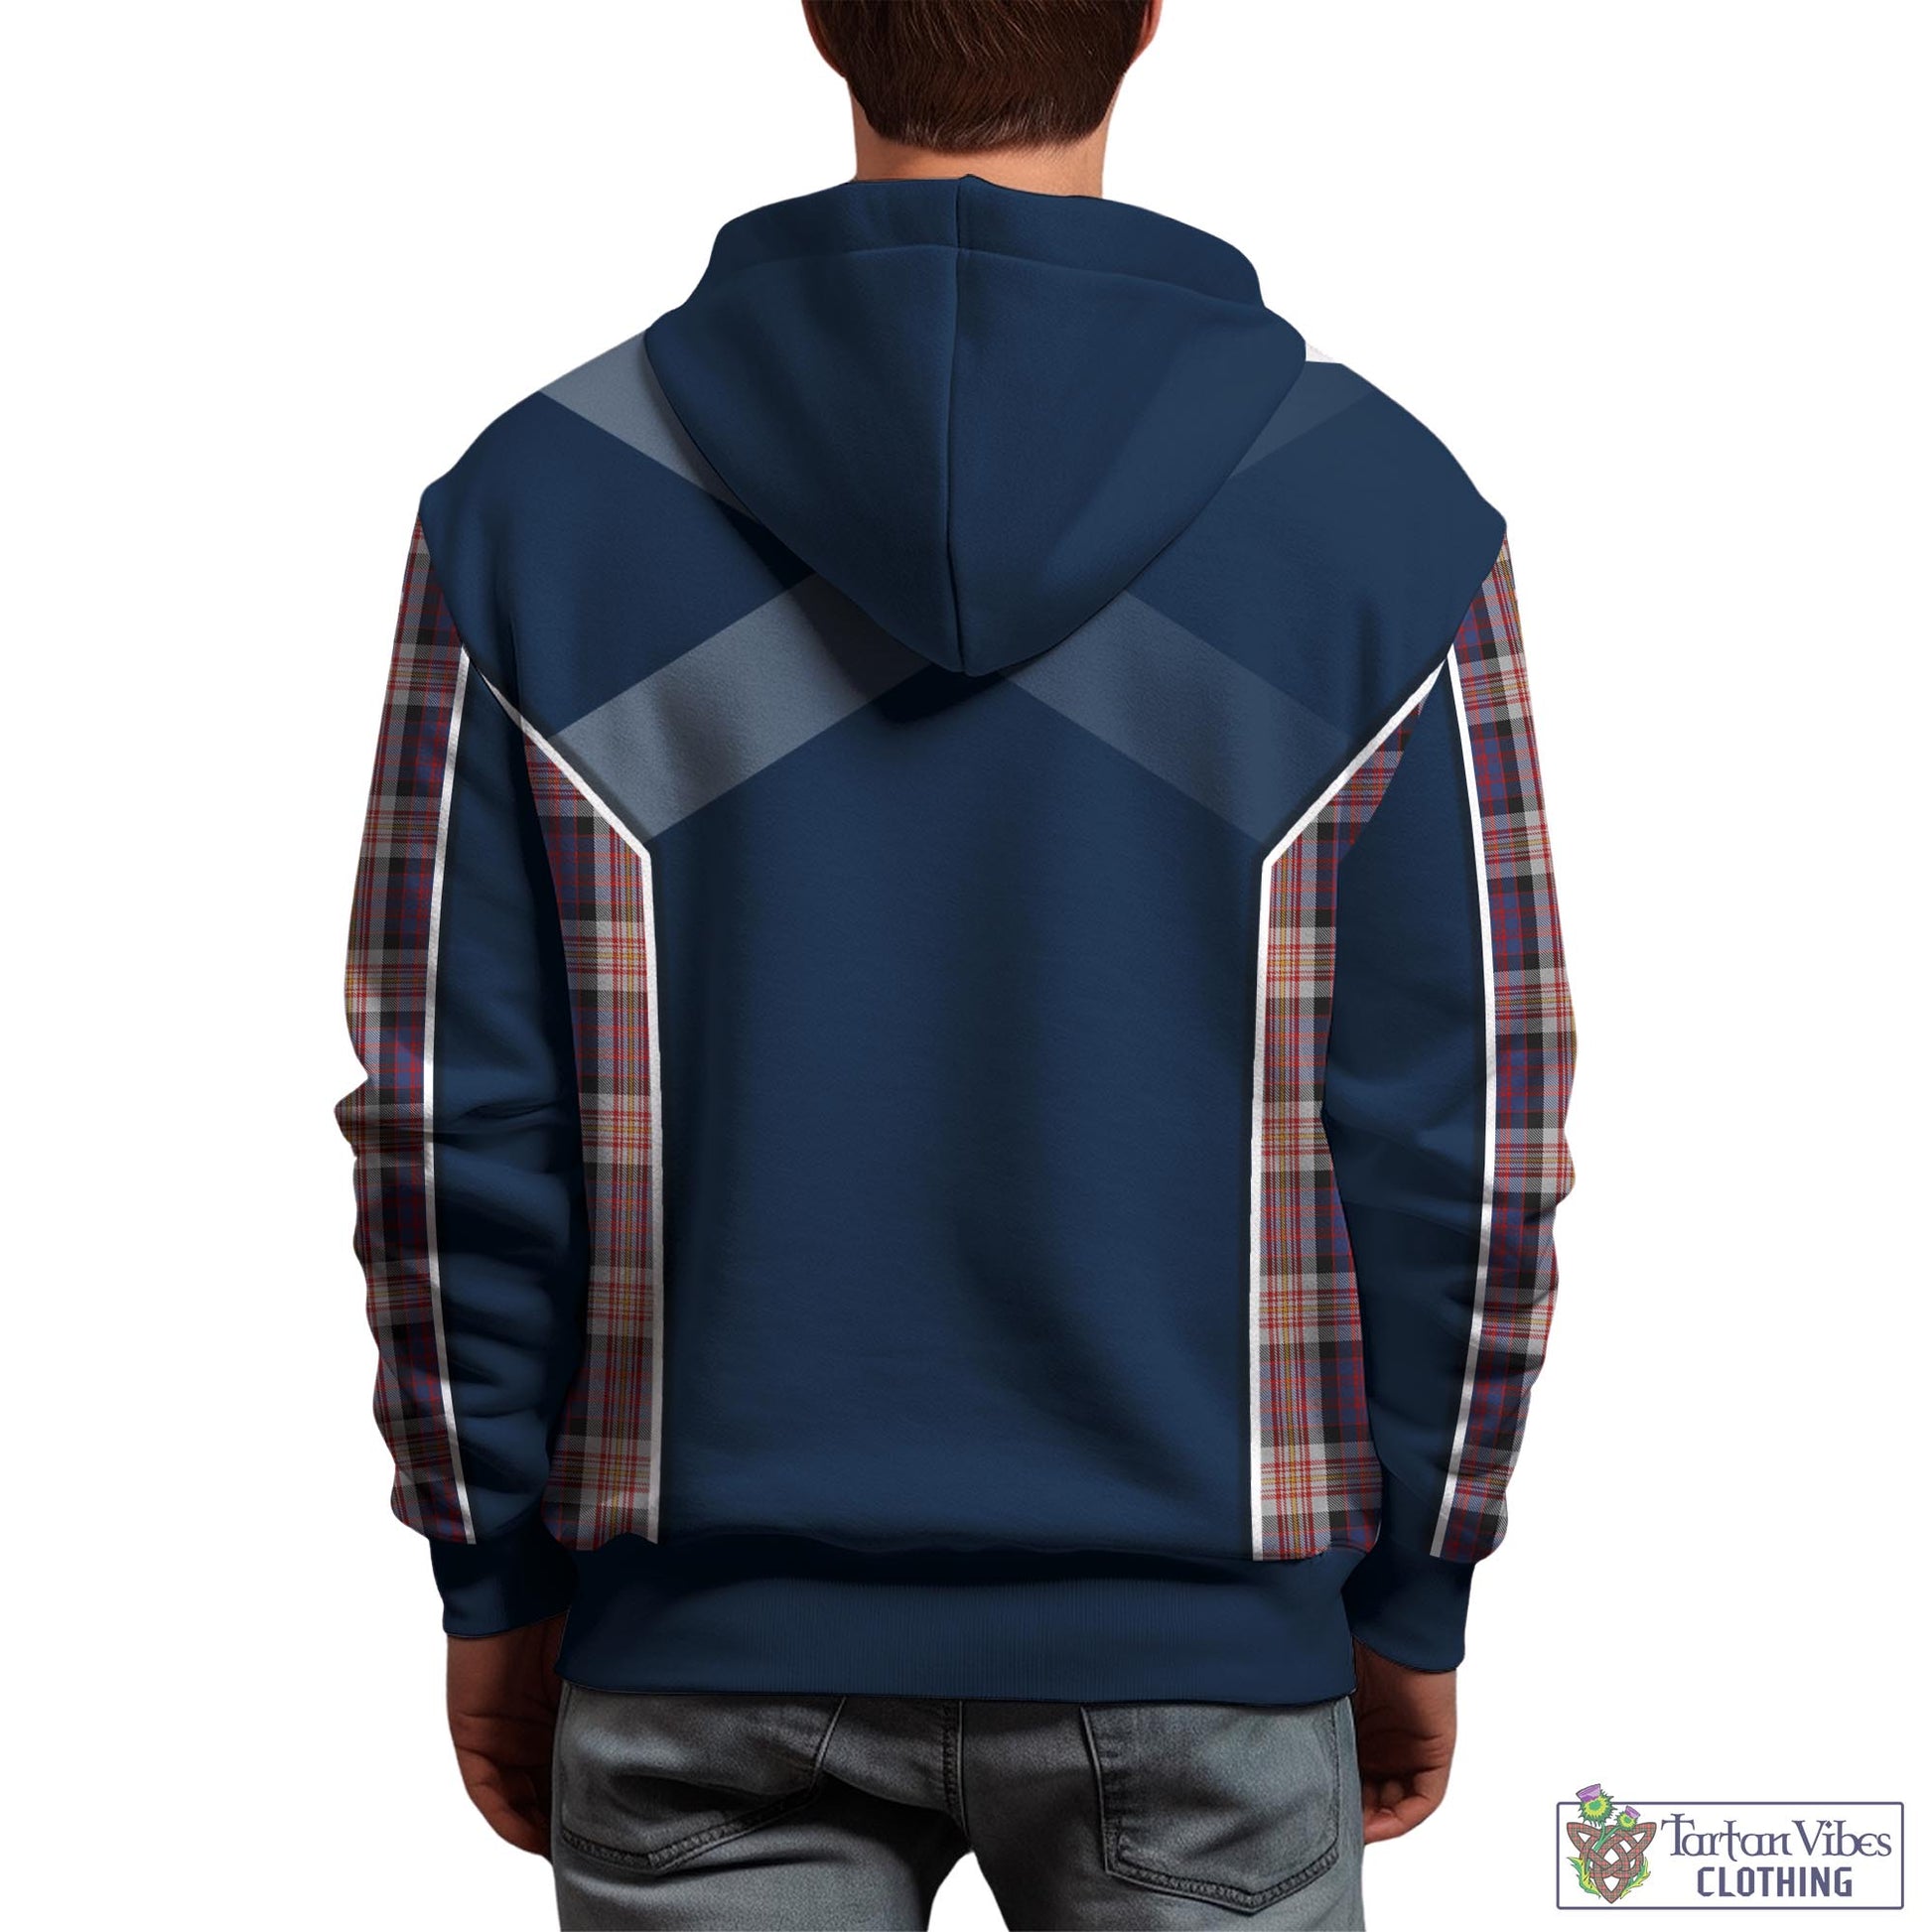 Tartan Vibes Clothing Carnegie Tartan Hoodie with Family Crest and Lion Rampant Vibes Sport Style